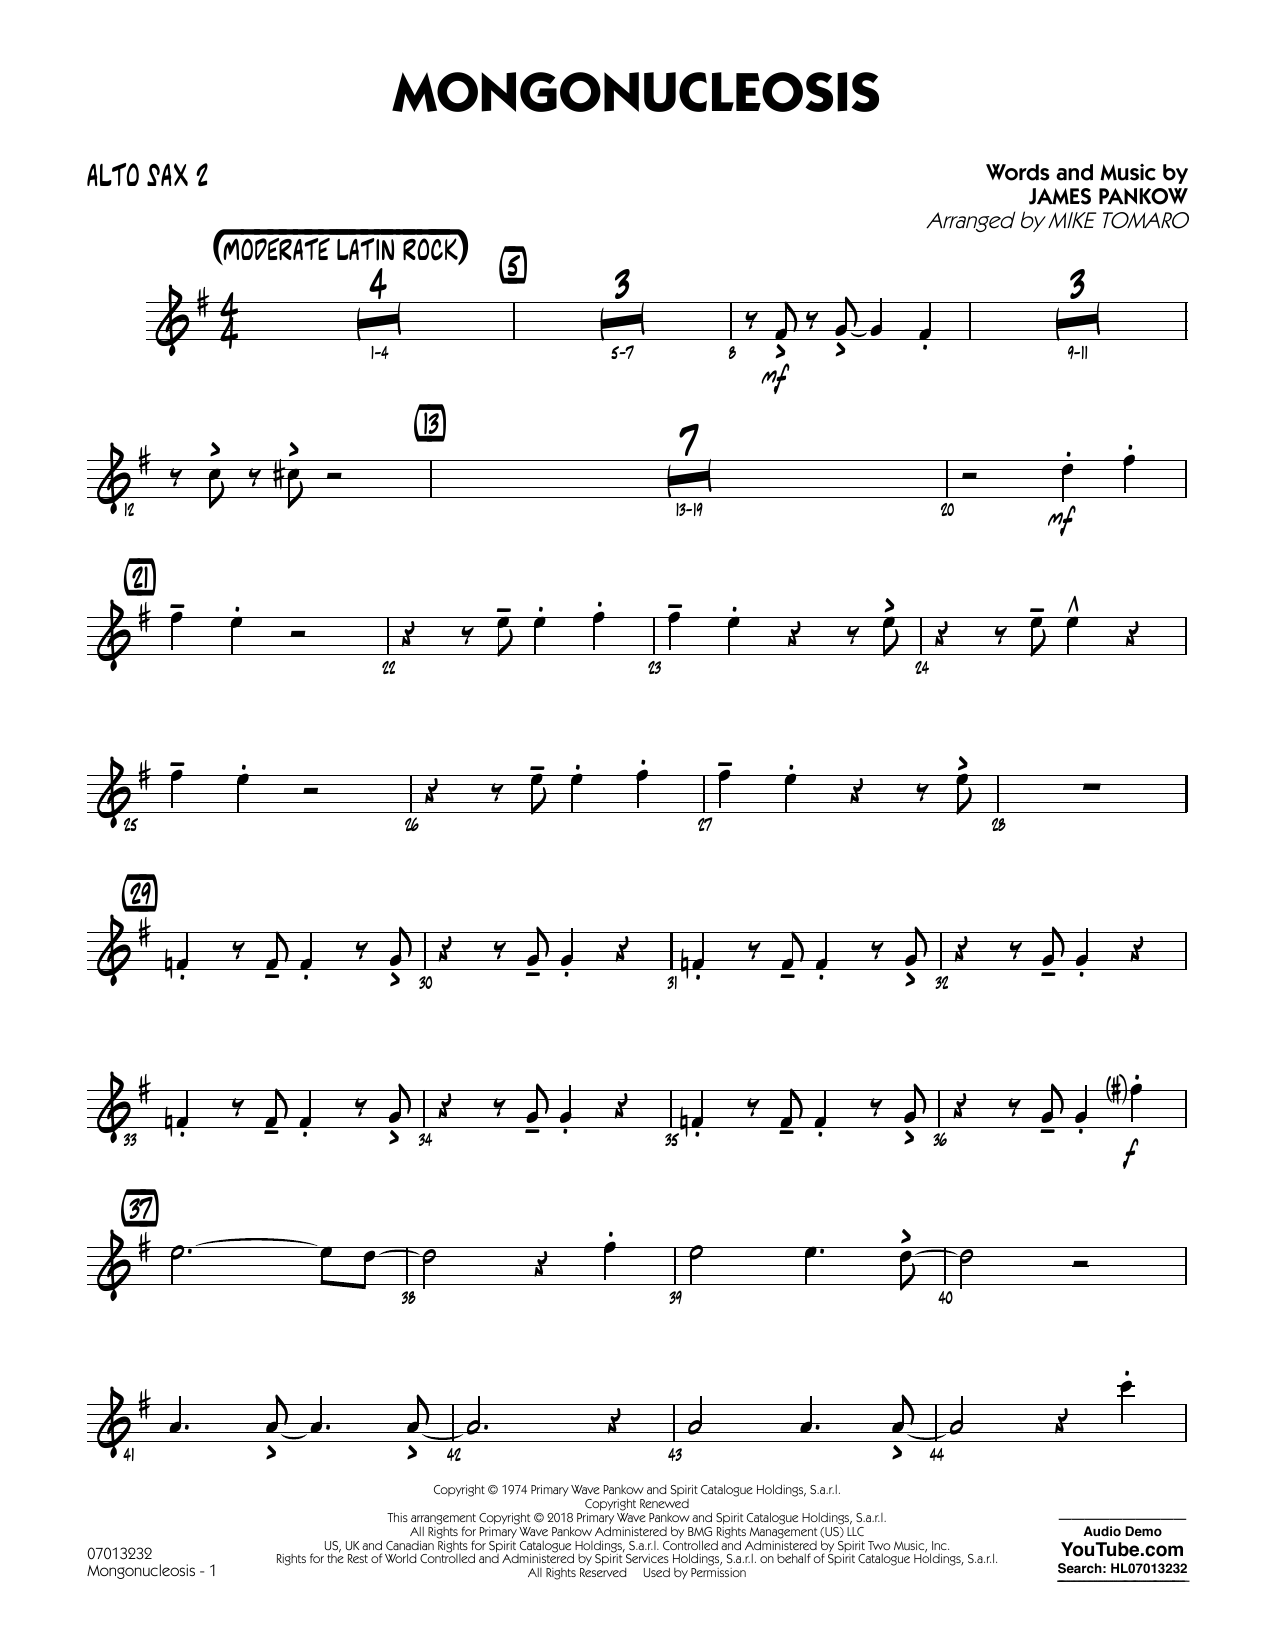 Chicago Mongonucleosis (arr. Mike Tomaro) - Alto Sax 2 sheet music preview music notes and score for Jazz Ensemble including 3 page(s)